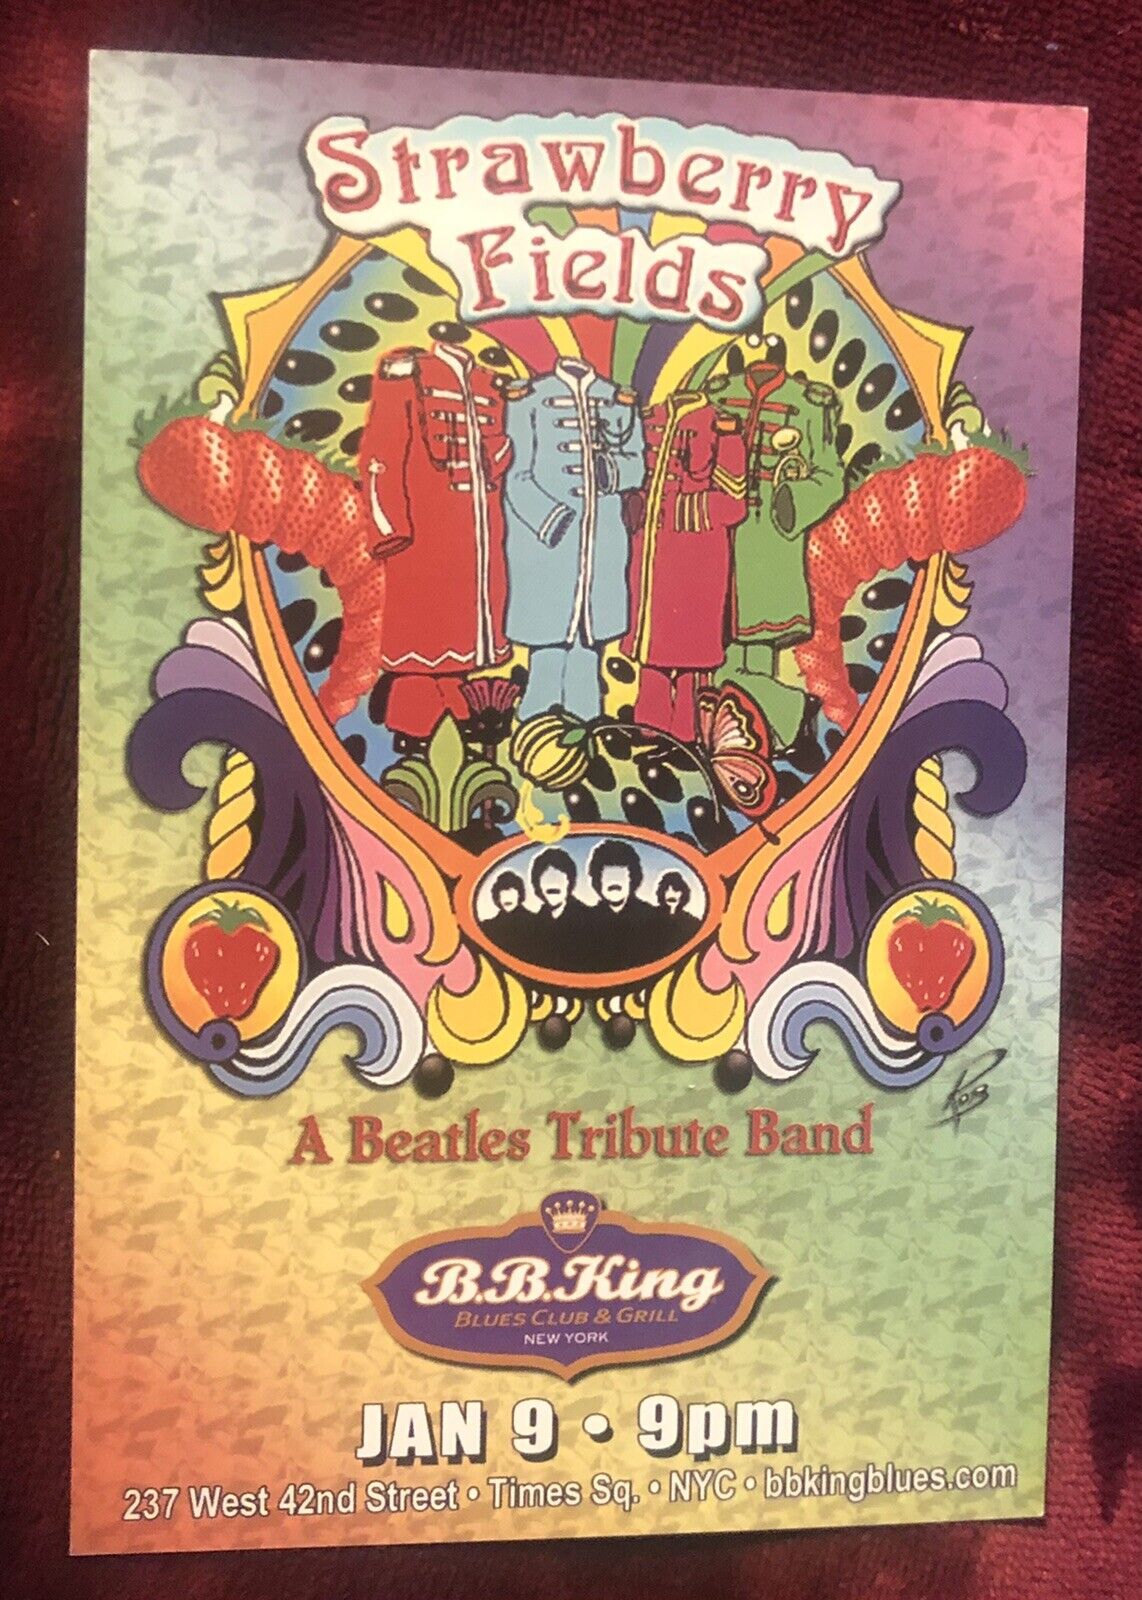 2001 Ad Strawberry Fields Beatles Tribute Band At B B King Blues Club & Grill